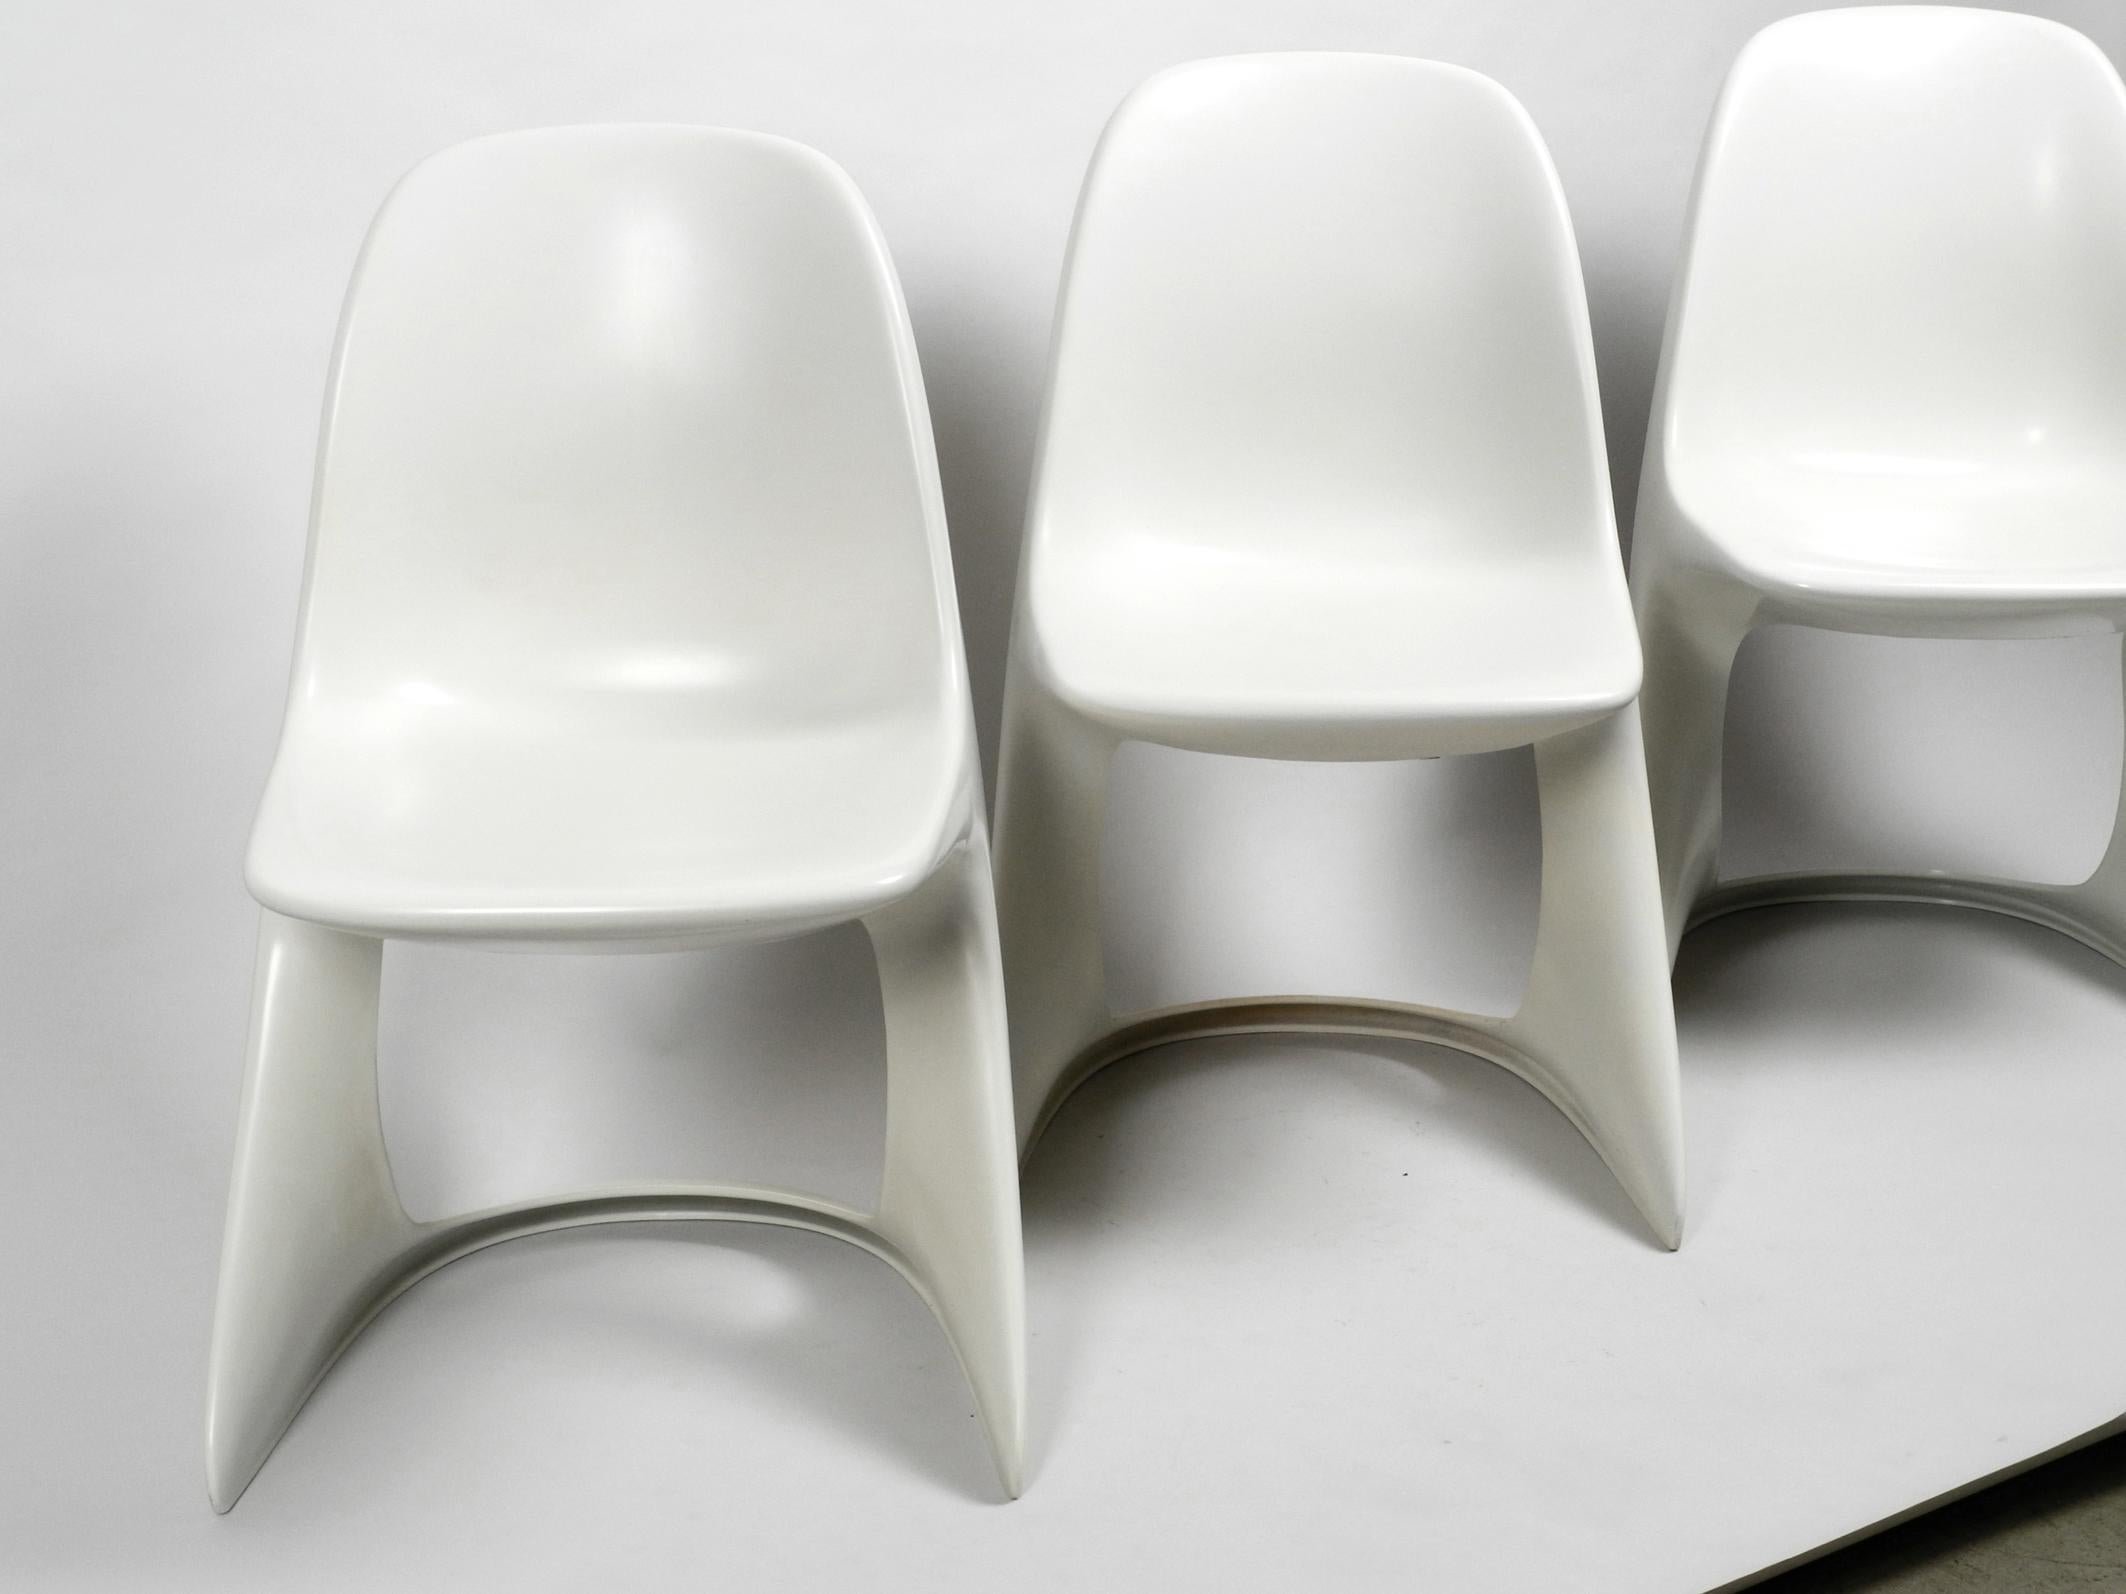 Three Original Casalino Chairs from Casala Model 2004/2005 from 1973 and 1980 7